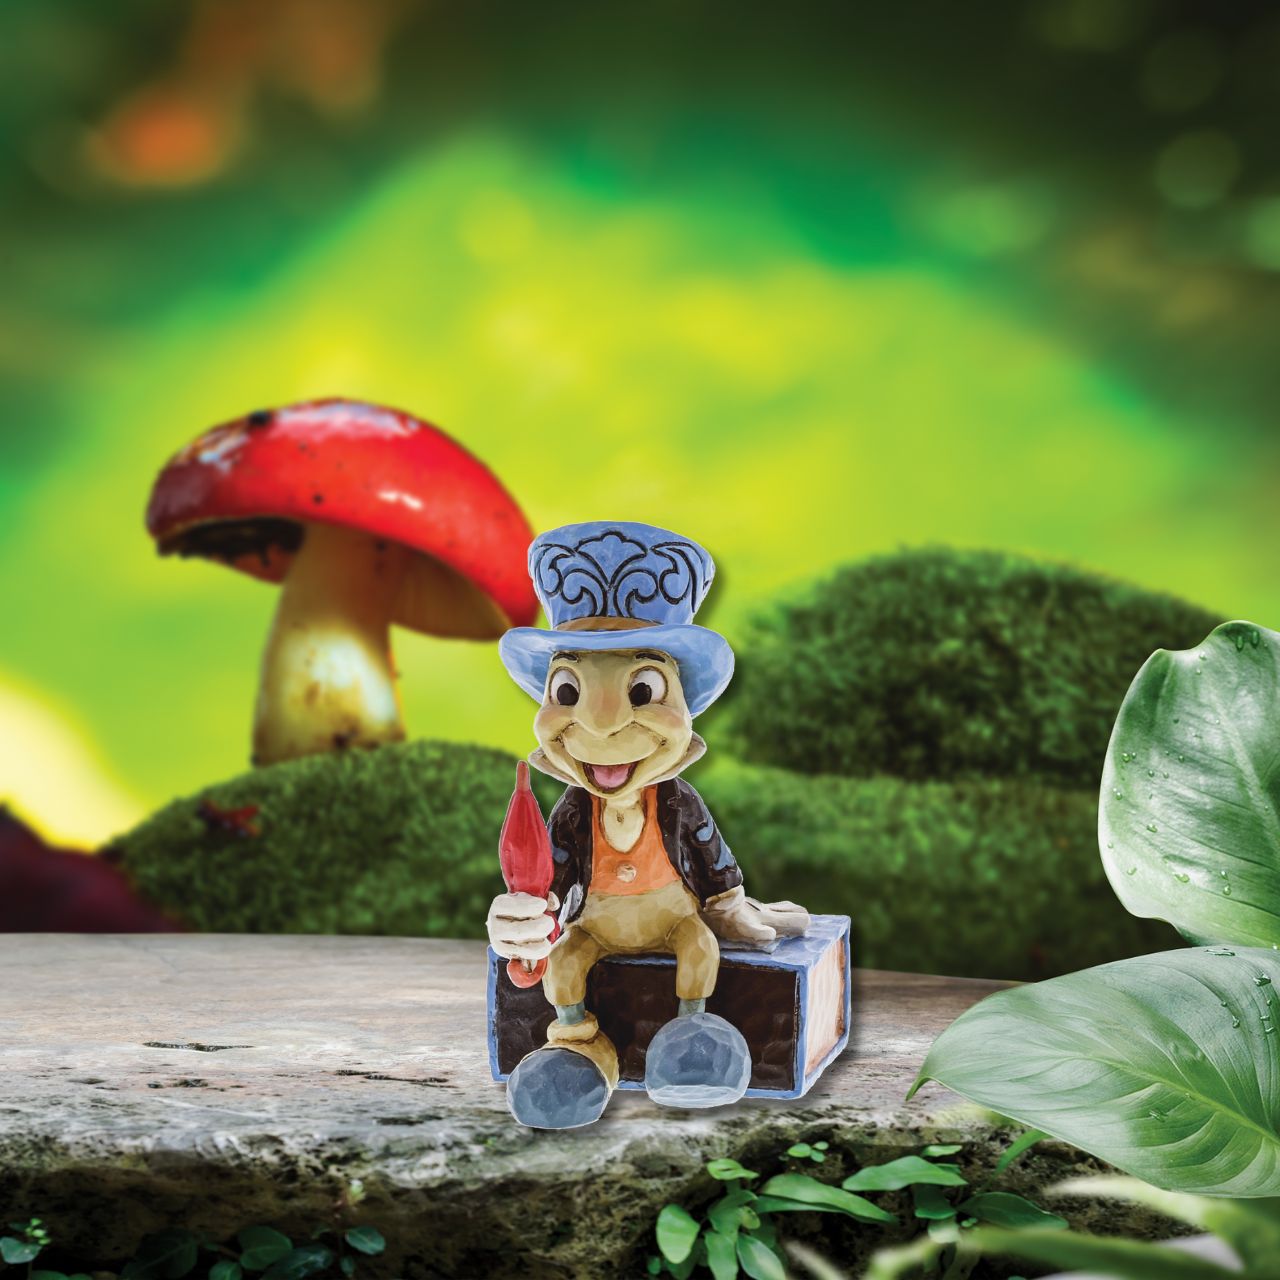 Beautifully handcrafted and delightfully decorated in time-honoured folk art motifs, Jim Shore's charming miniatures capture the essence of beloved Disney characters. Jiminy Cricket imparts some wisdom in this scene from the classic Pinocchio.